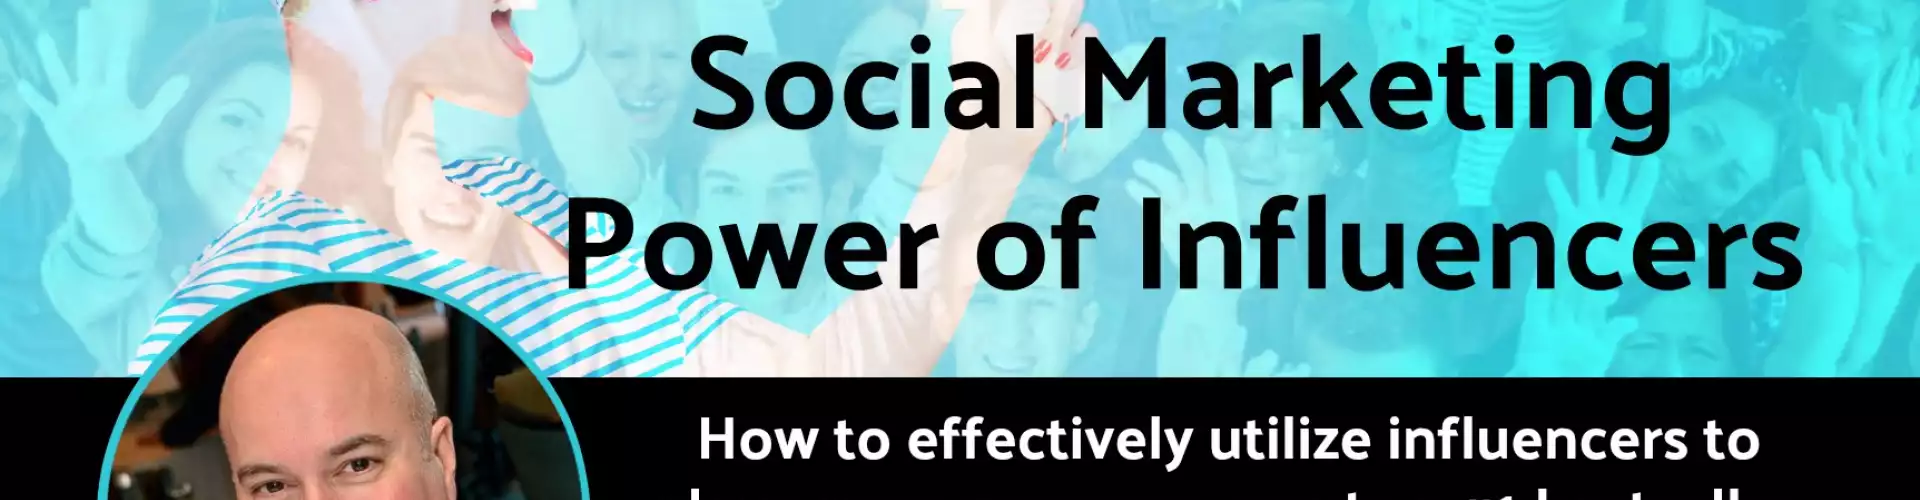 Harnessing the Social Marketing Power of Influencers